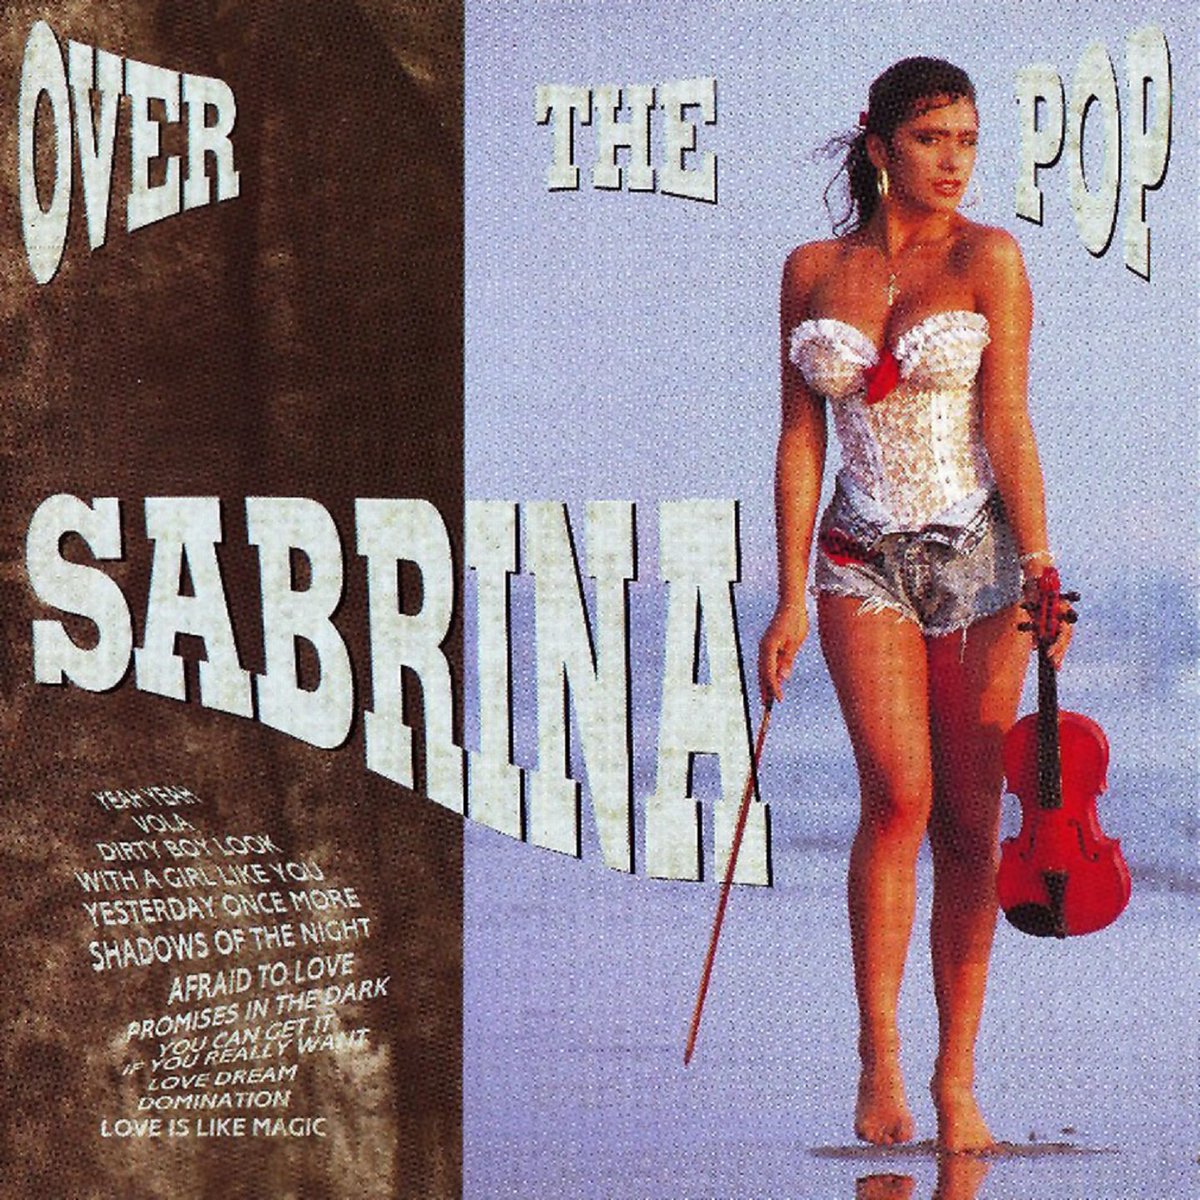 Now on @iTunes store my record #OverThePop @Believe_Italy #Remastered #Rarity 
https://t.co/dppmzCxrKi https://t.co/r0XU9h9r5x